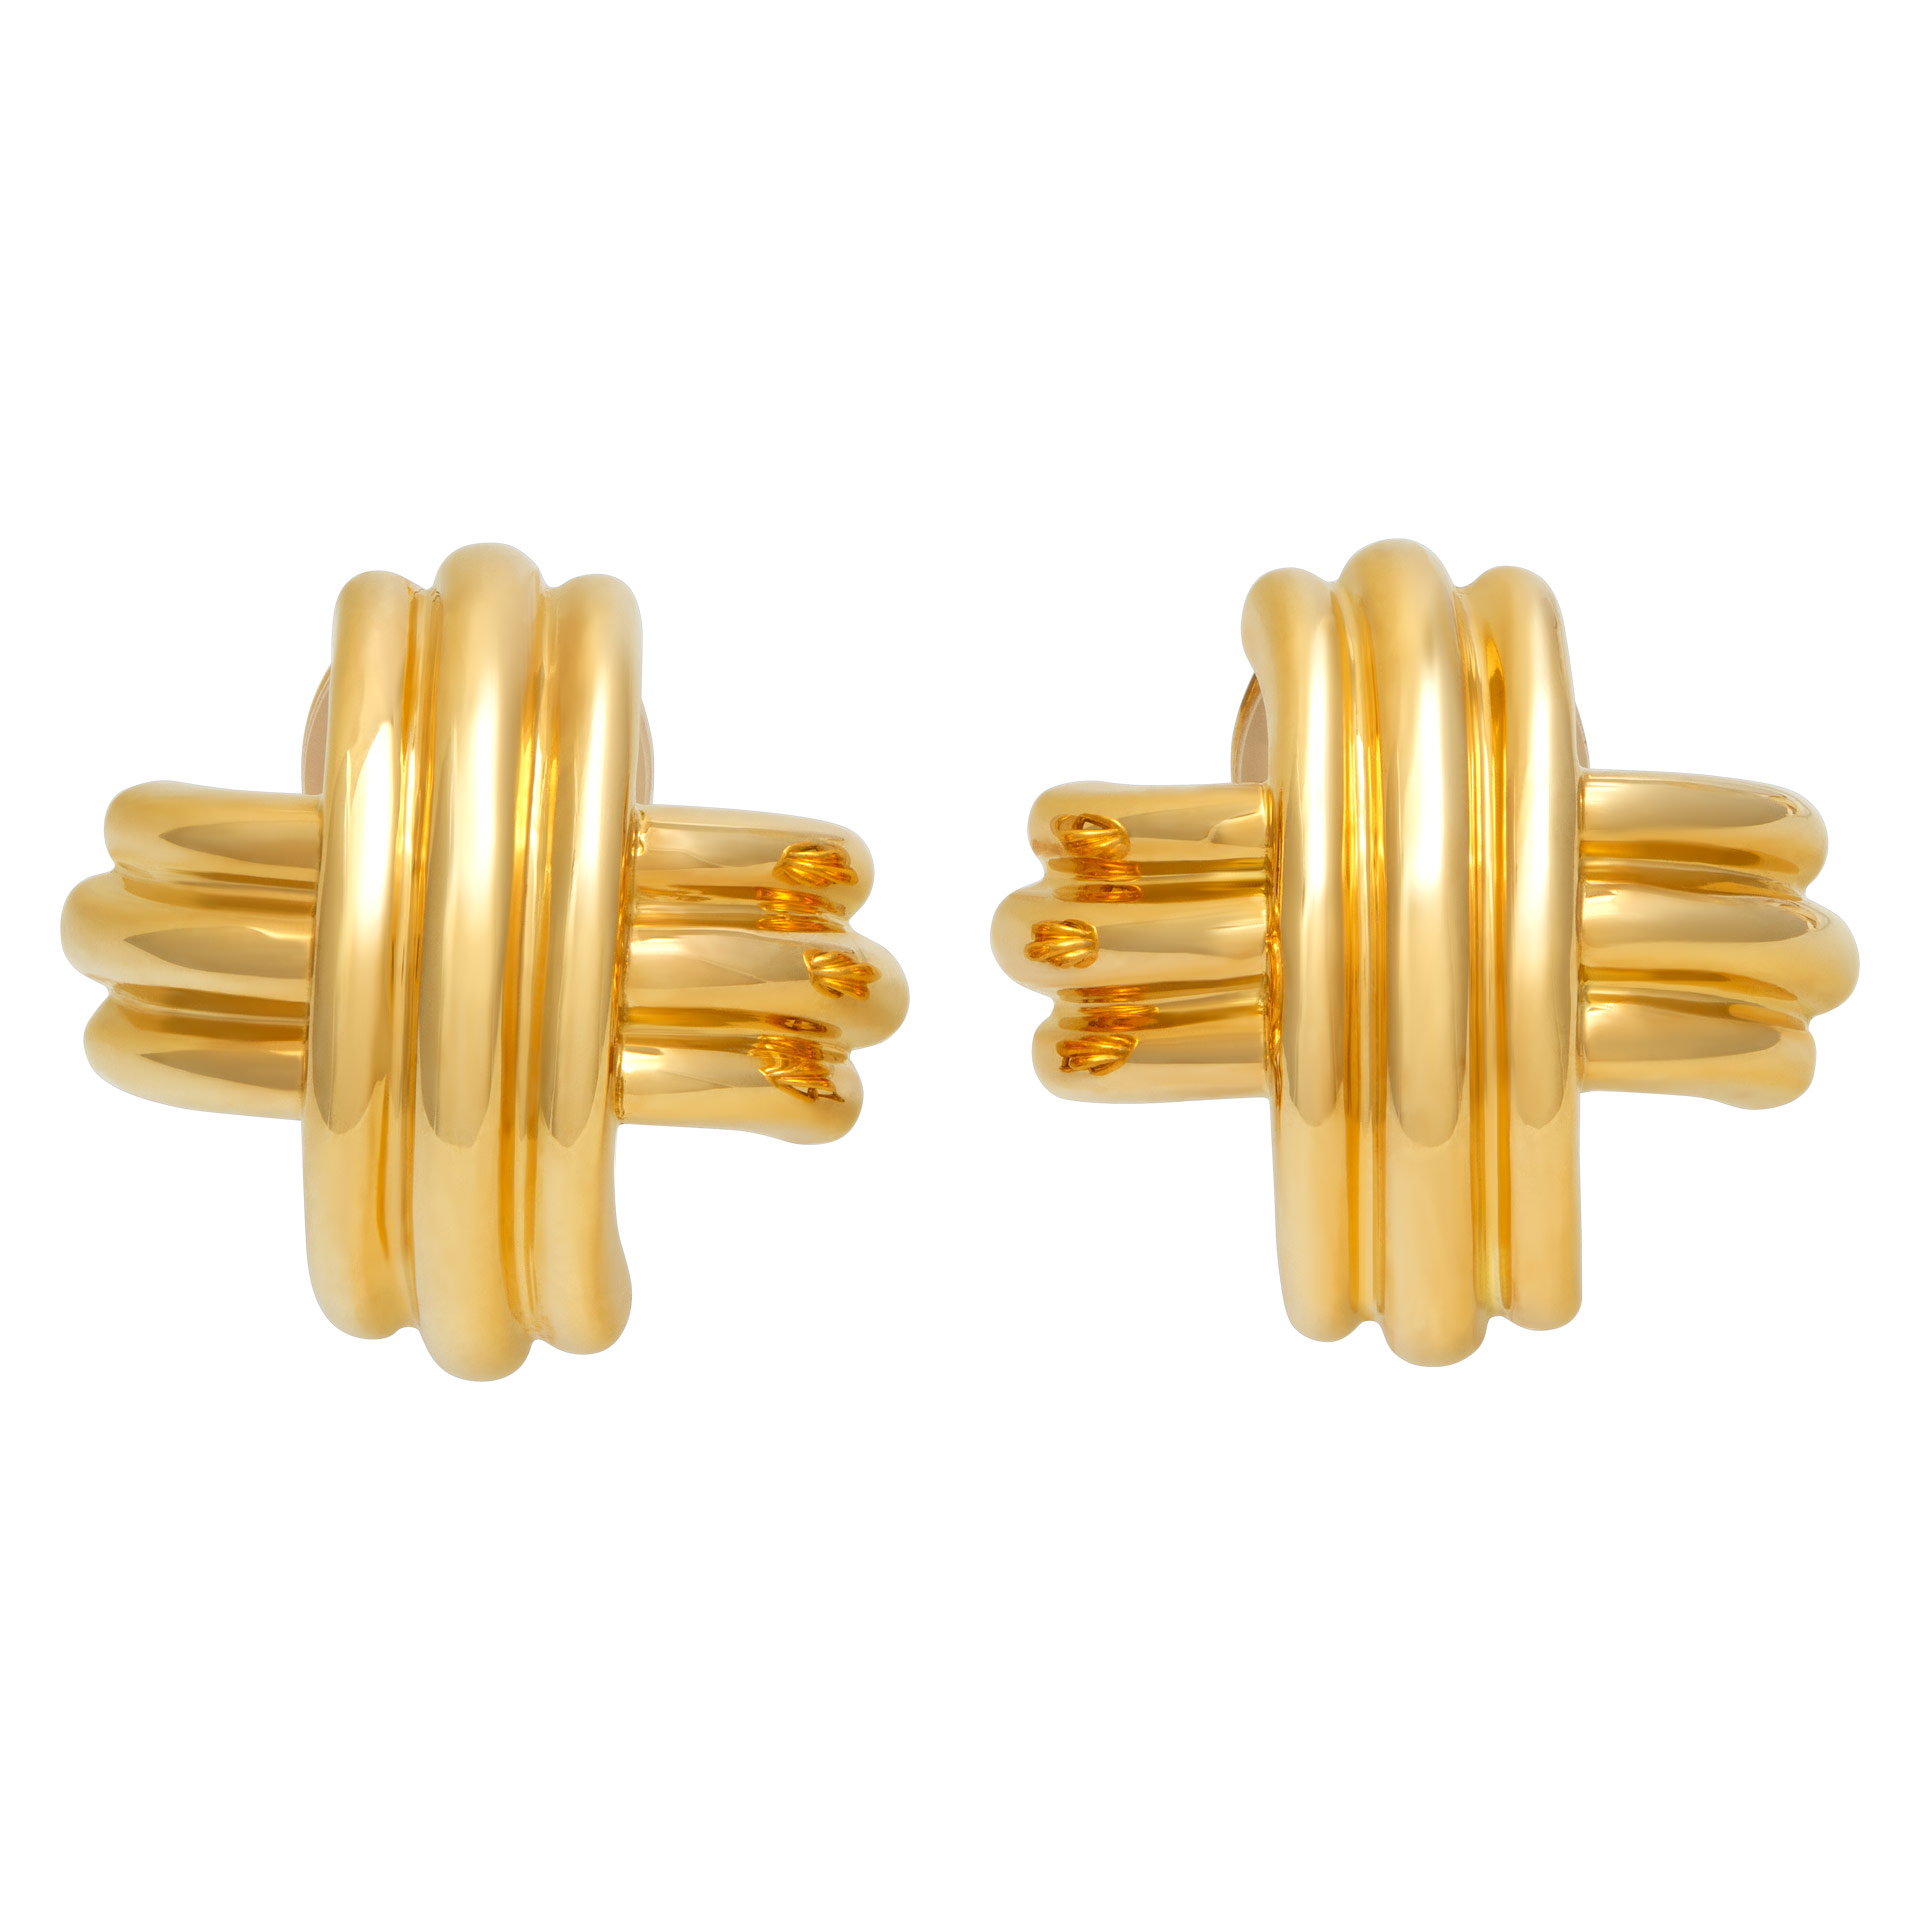 Tiffany & Co. Signature X collection earrings in 18k image 1